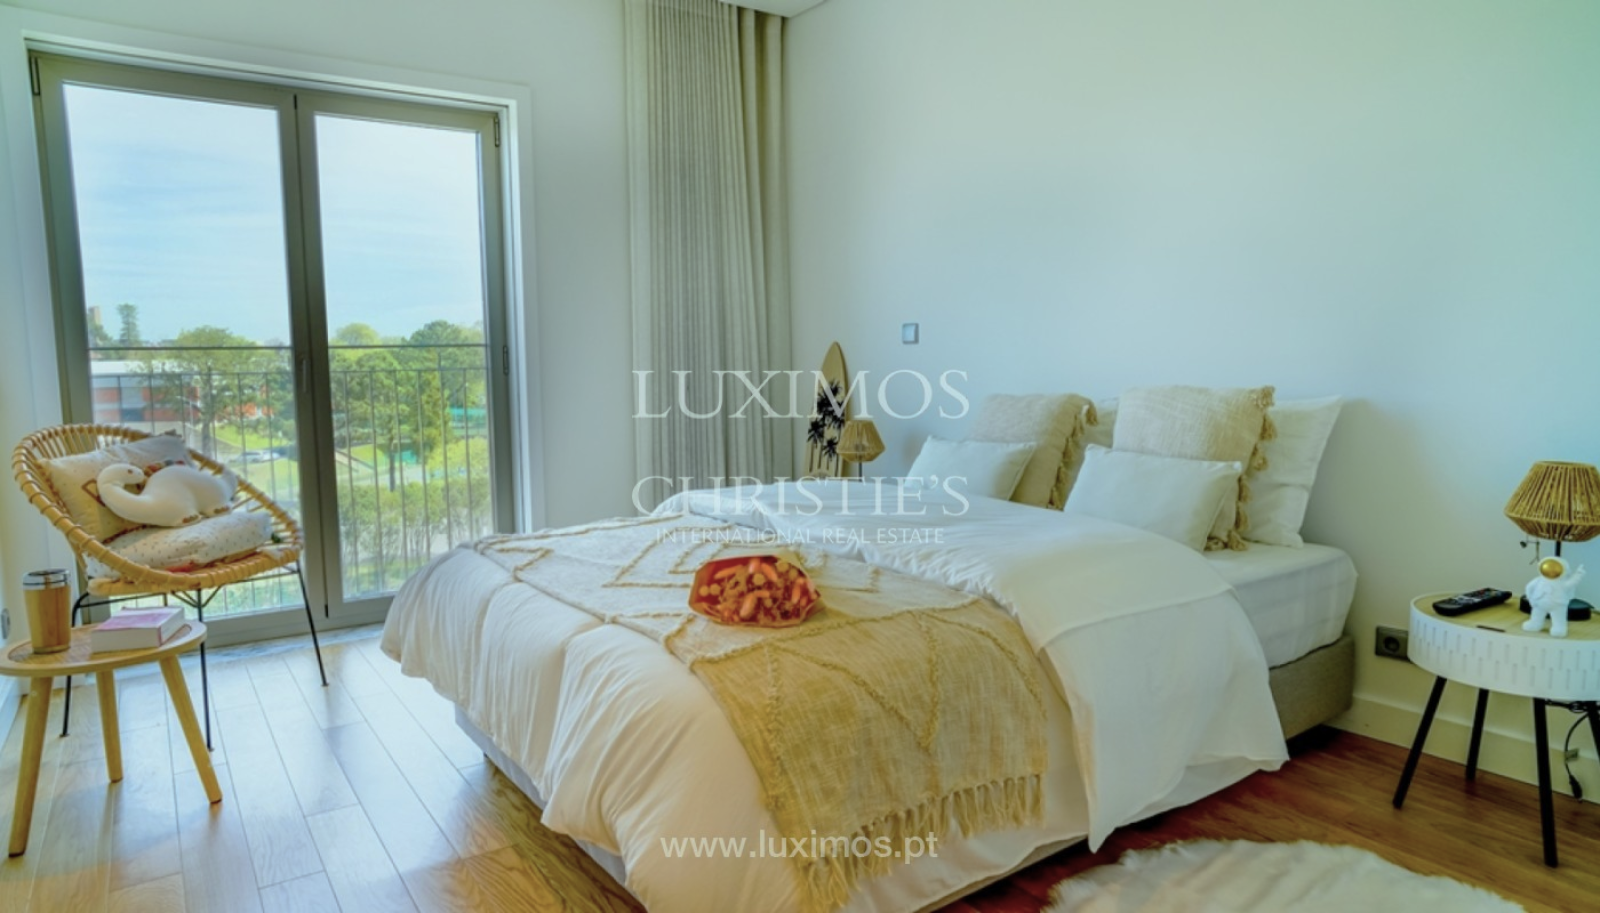 Four bedroom apartment with river views in Foz, for sale, Porto, Portugal_261088